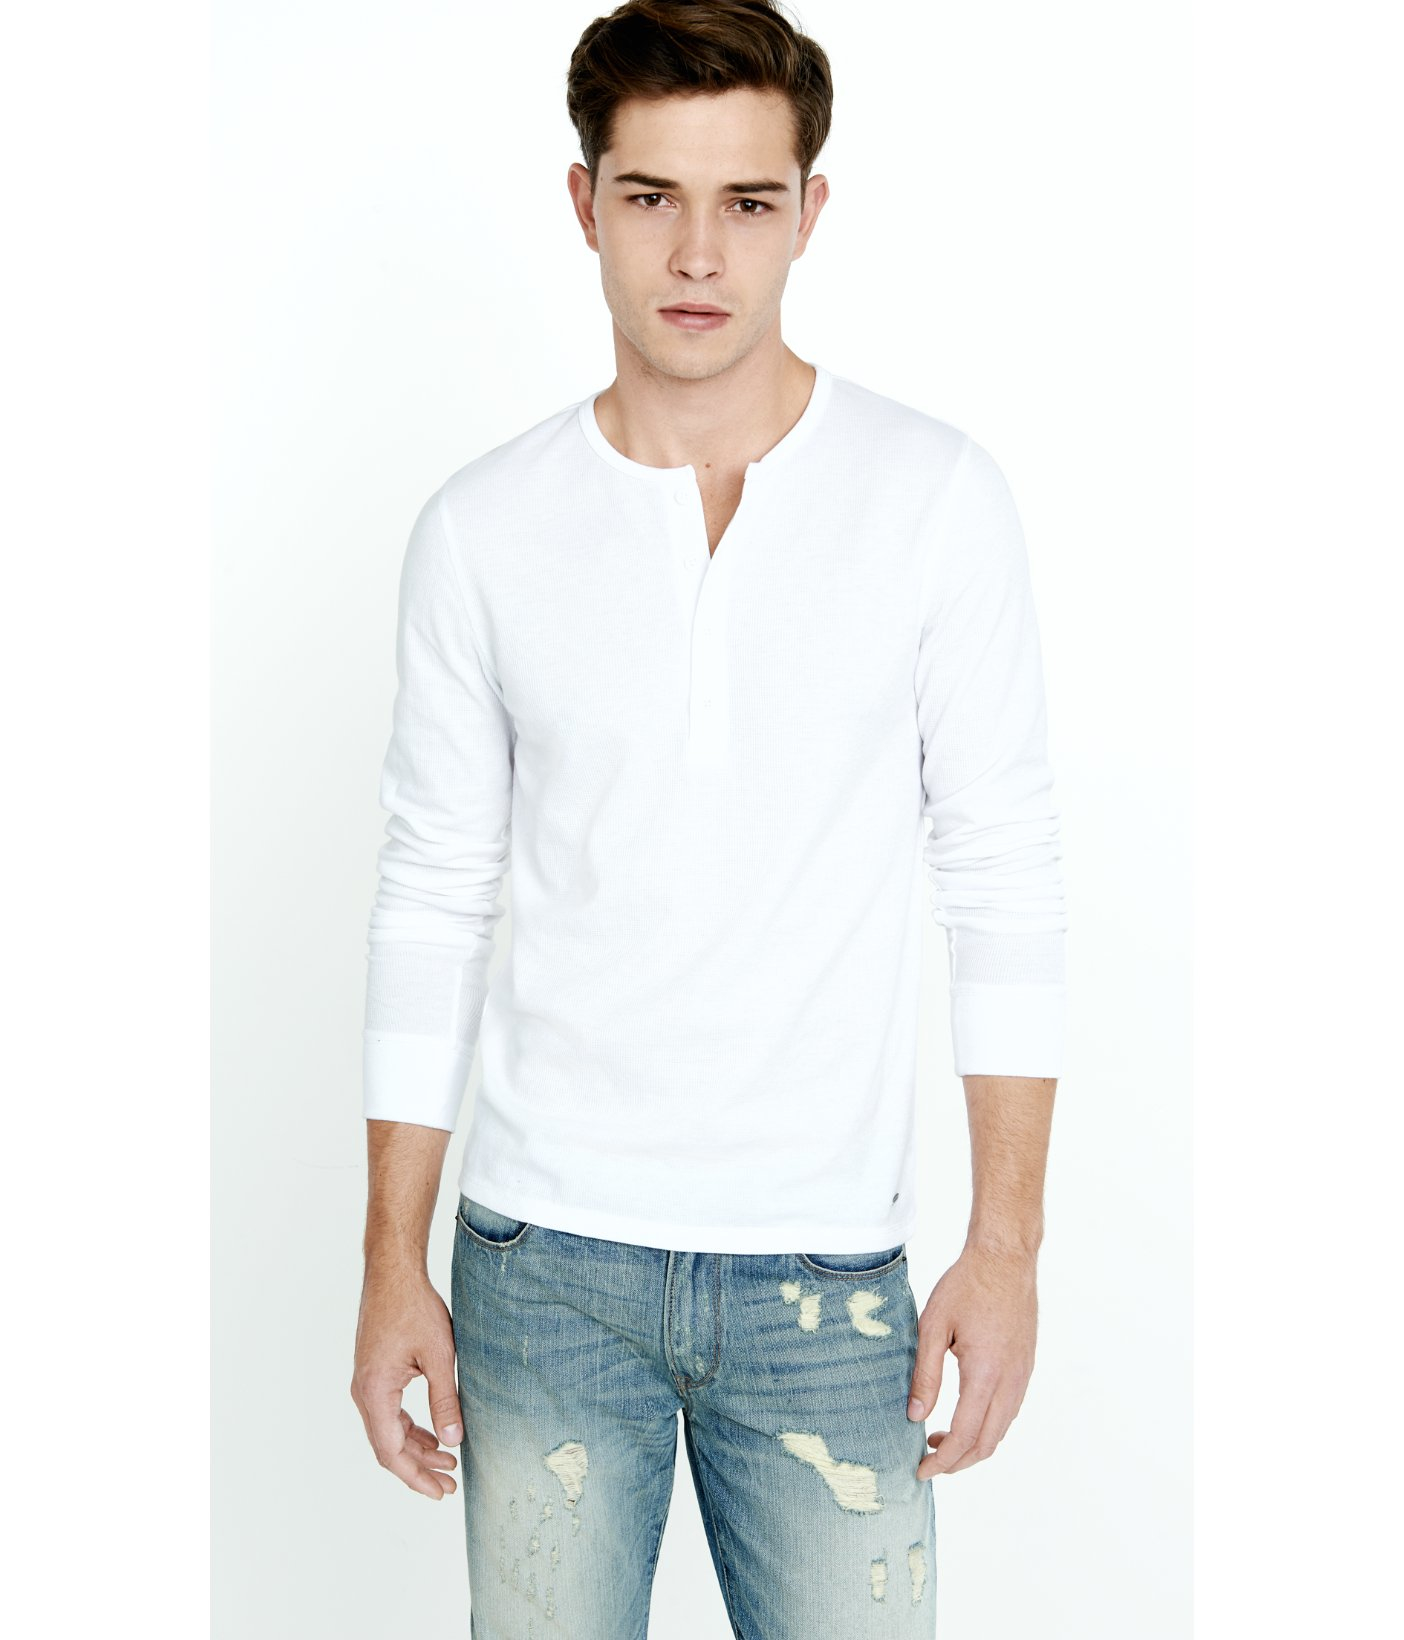 Express Long Sleeve Waffle Knit Henley T-shirt in White for Men - Lyst